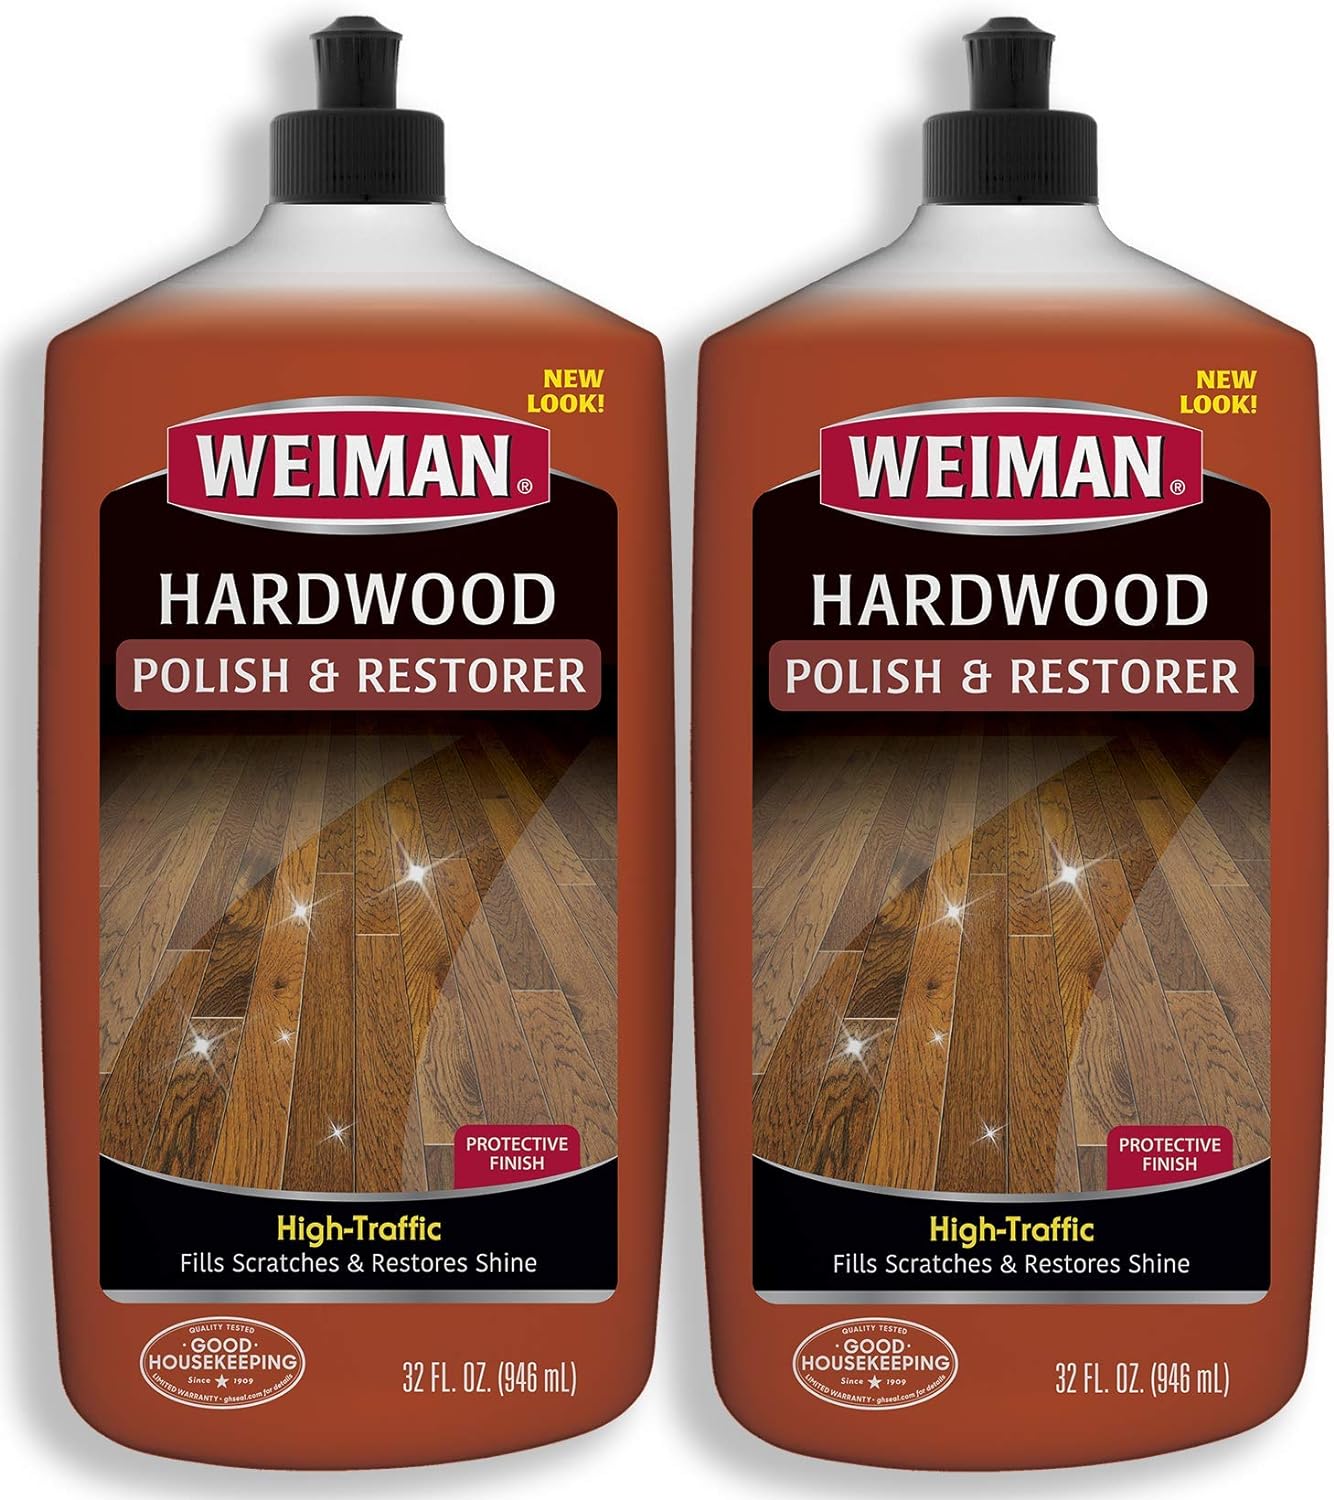 Weiman Wood Floor Polish and Restorer 32 Ounce (2 Pack) - High-Traffic Hardwood Floor, Natural Shine, Removes Scratches, Leaves Protective Layer